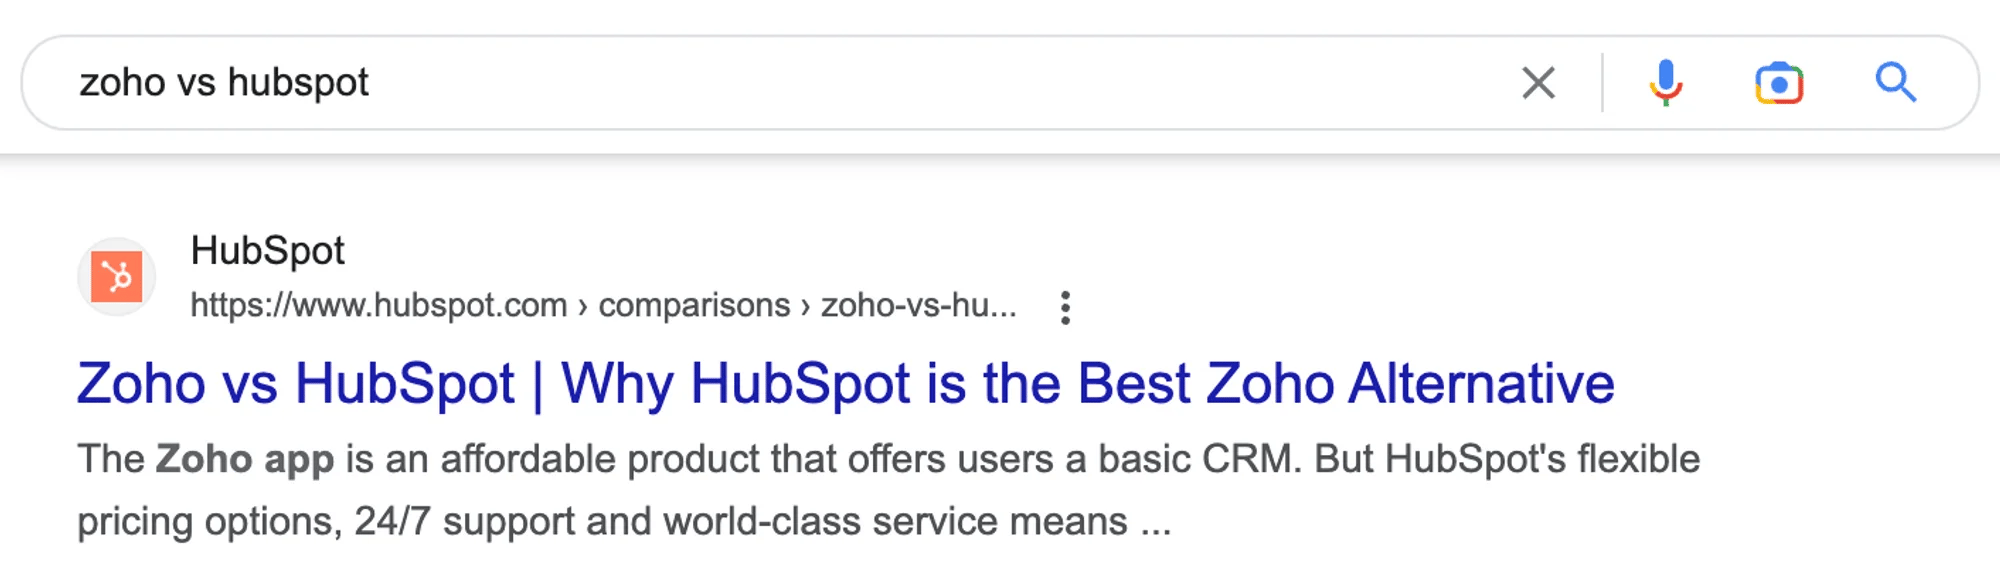 Example of competitor programmatic landing page: Zoho vs Hubspot 